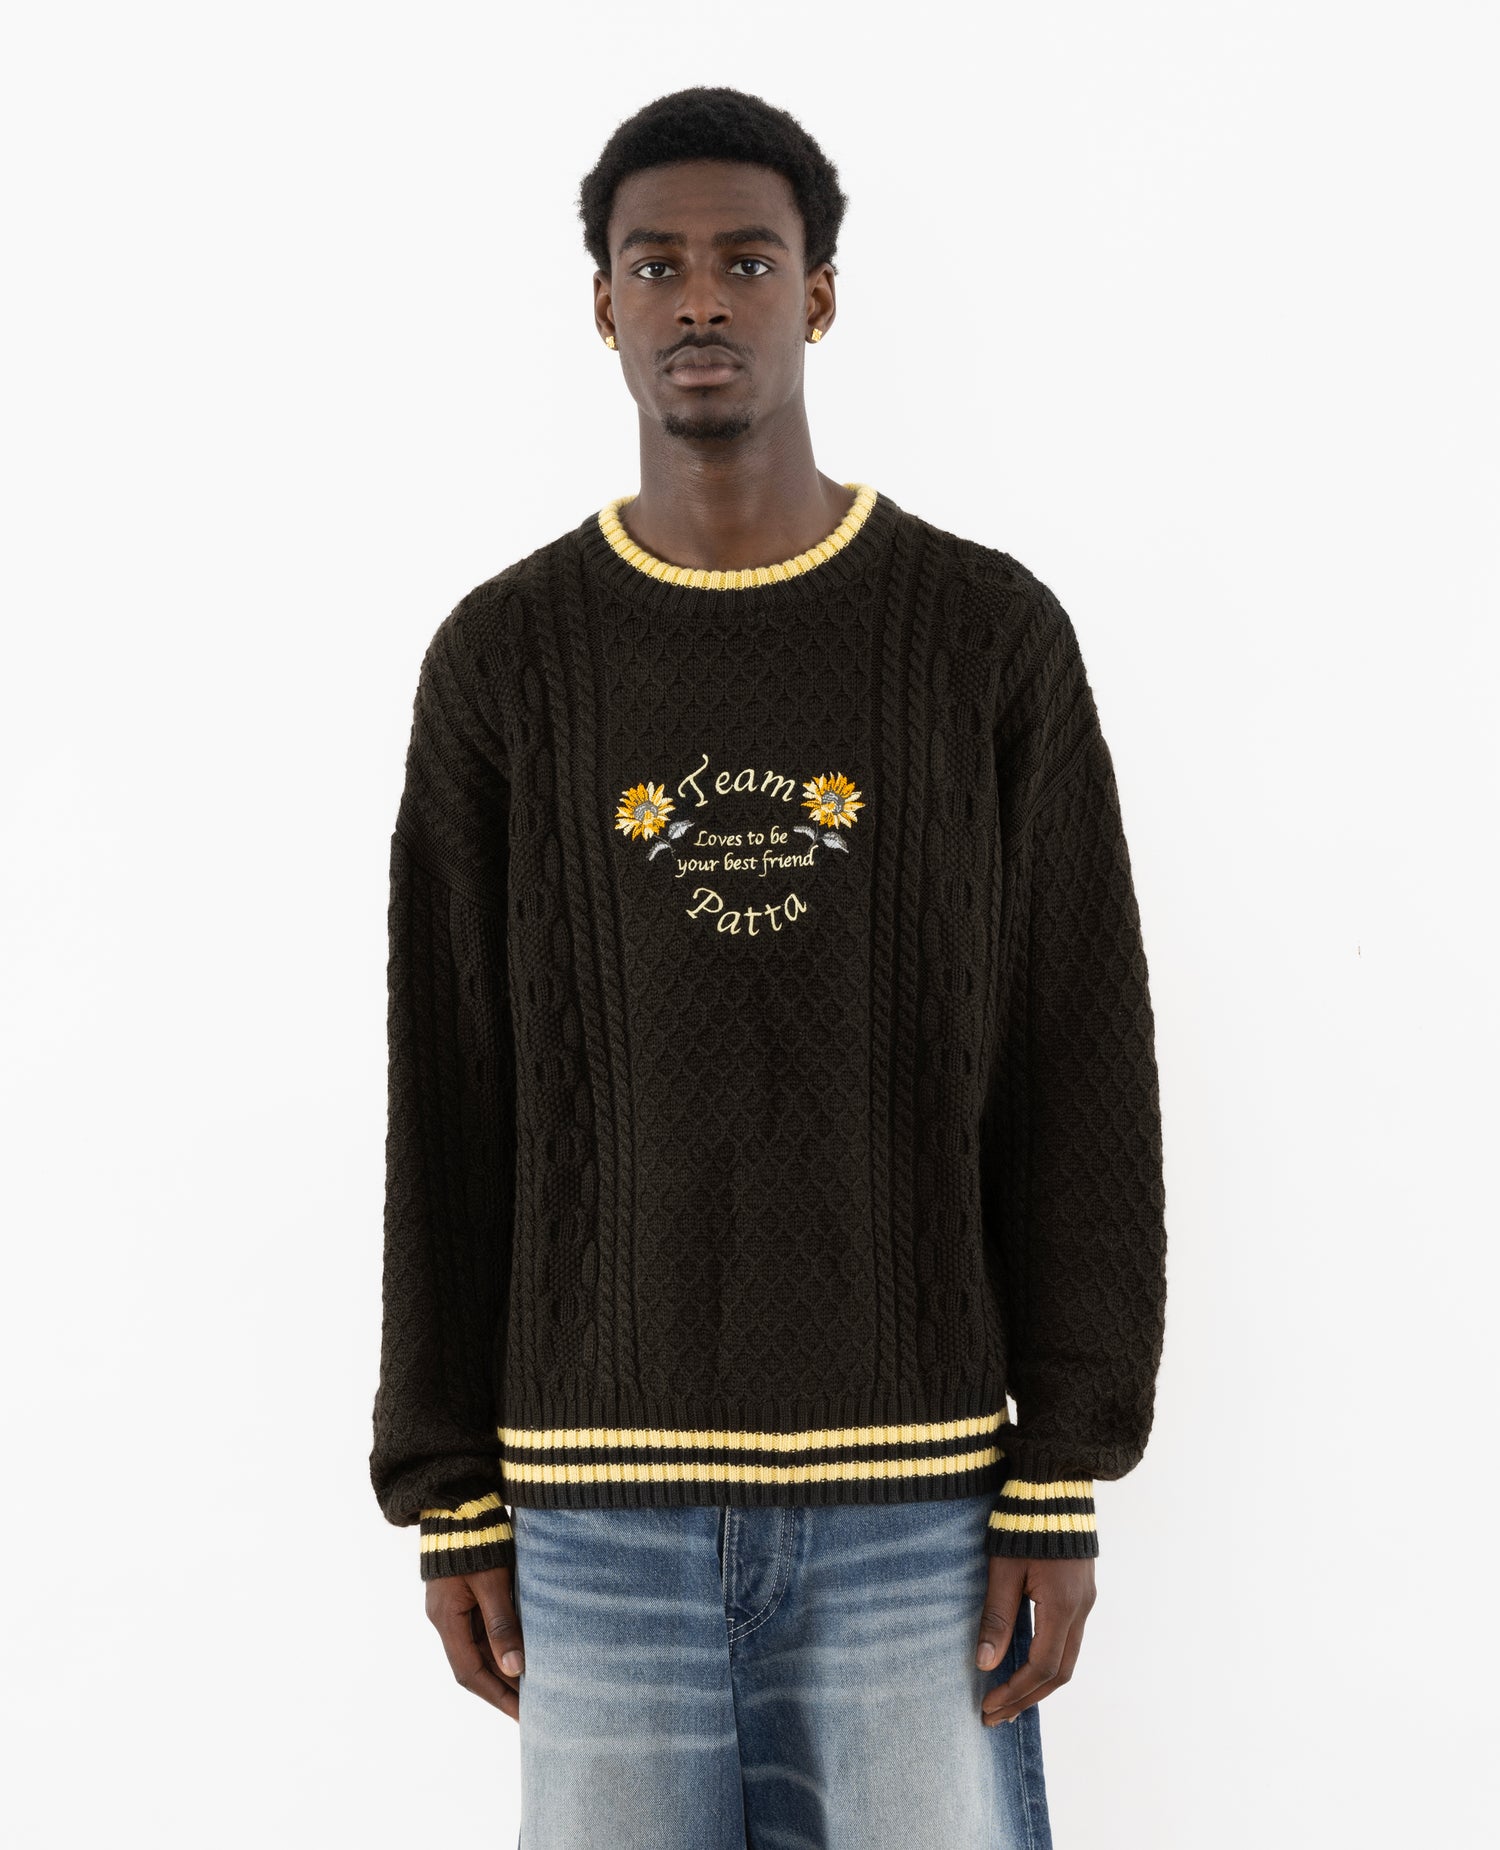 Patta Loves You Cable Knitted Sweater (Pirate Black)